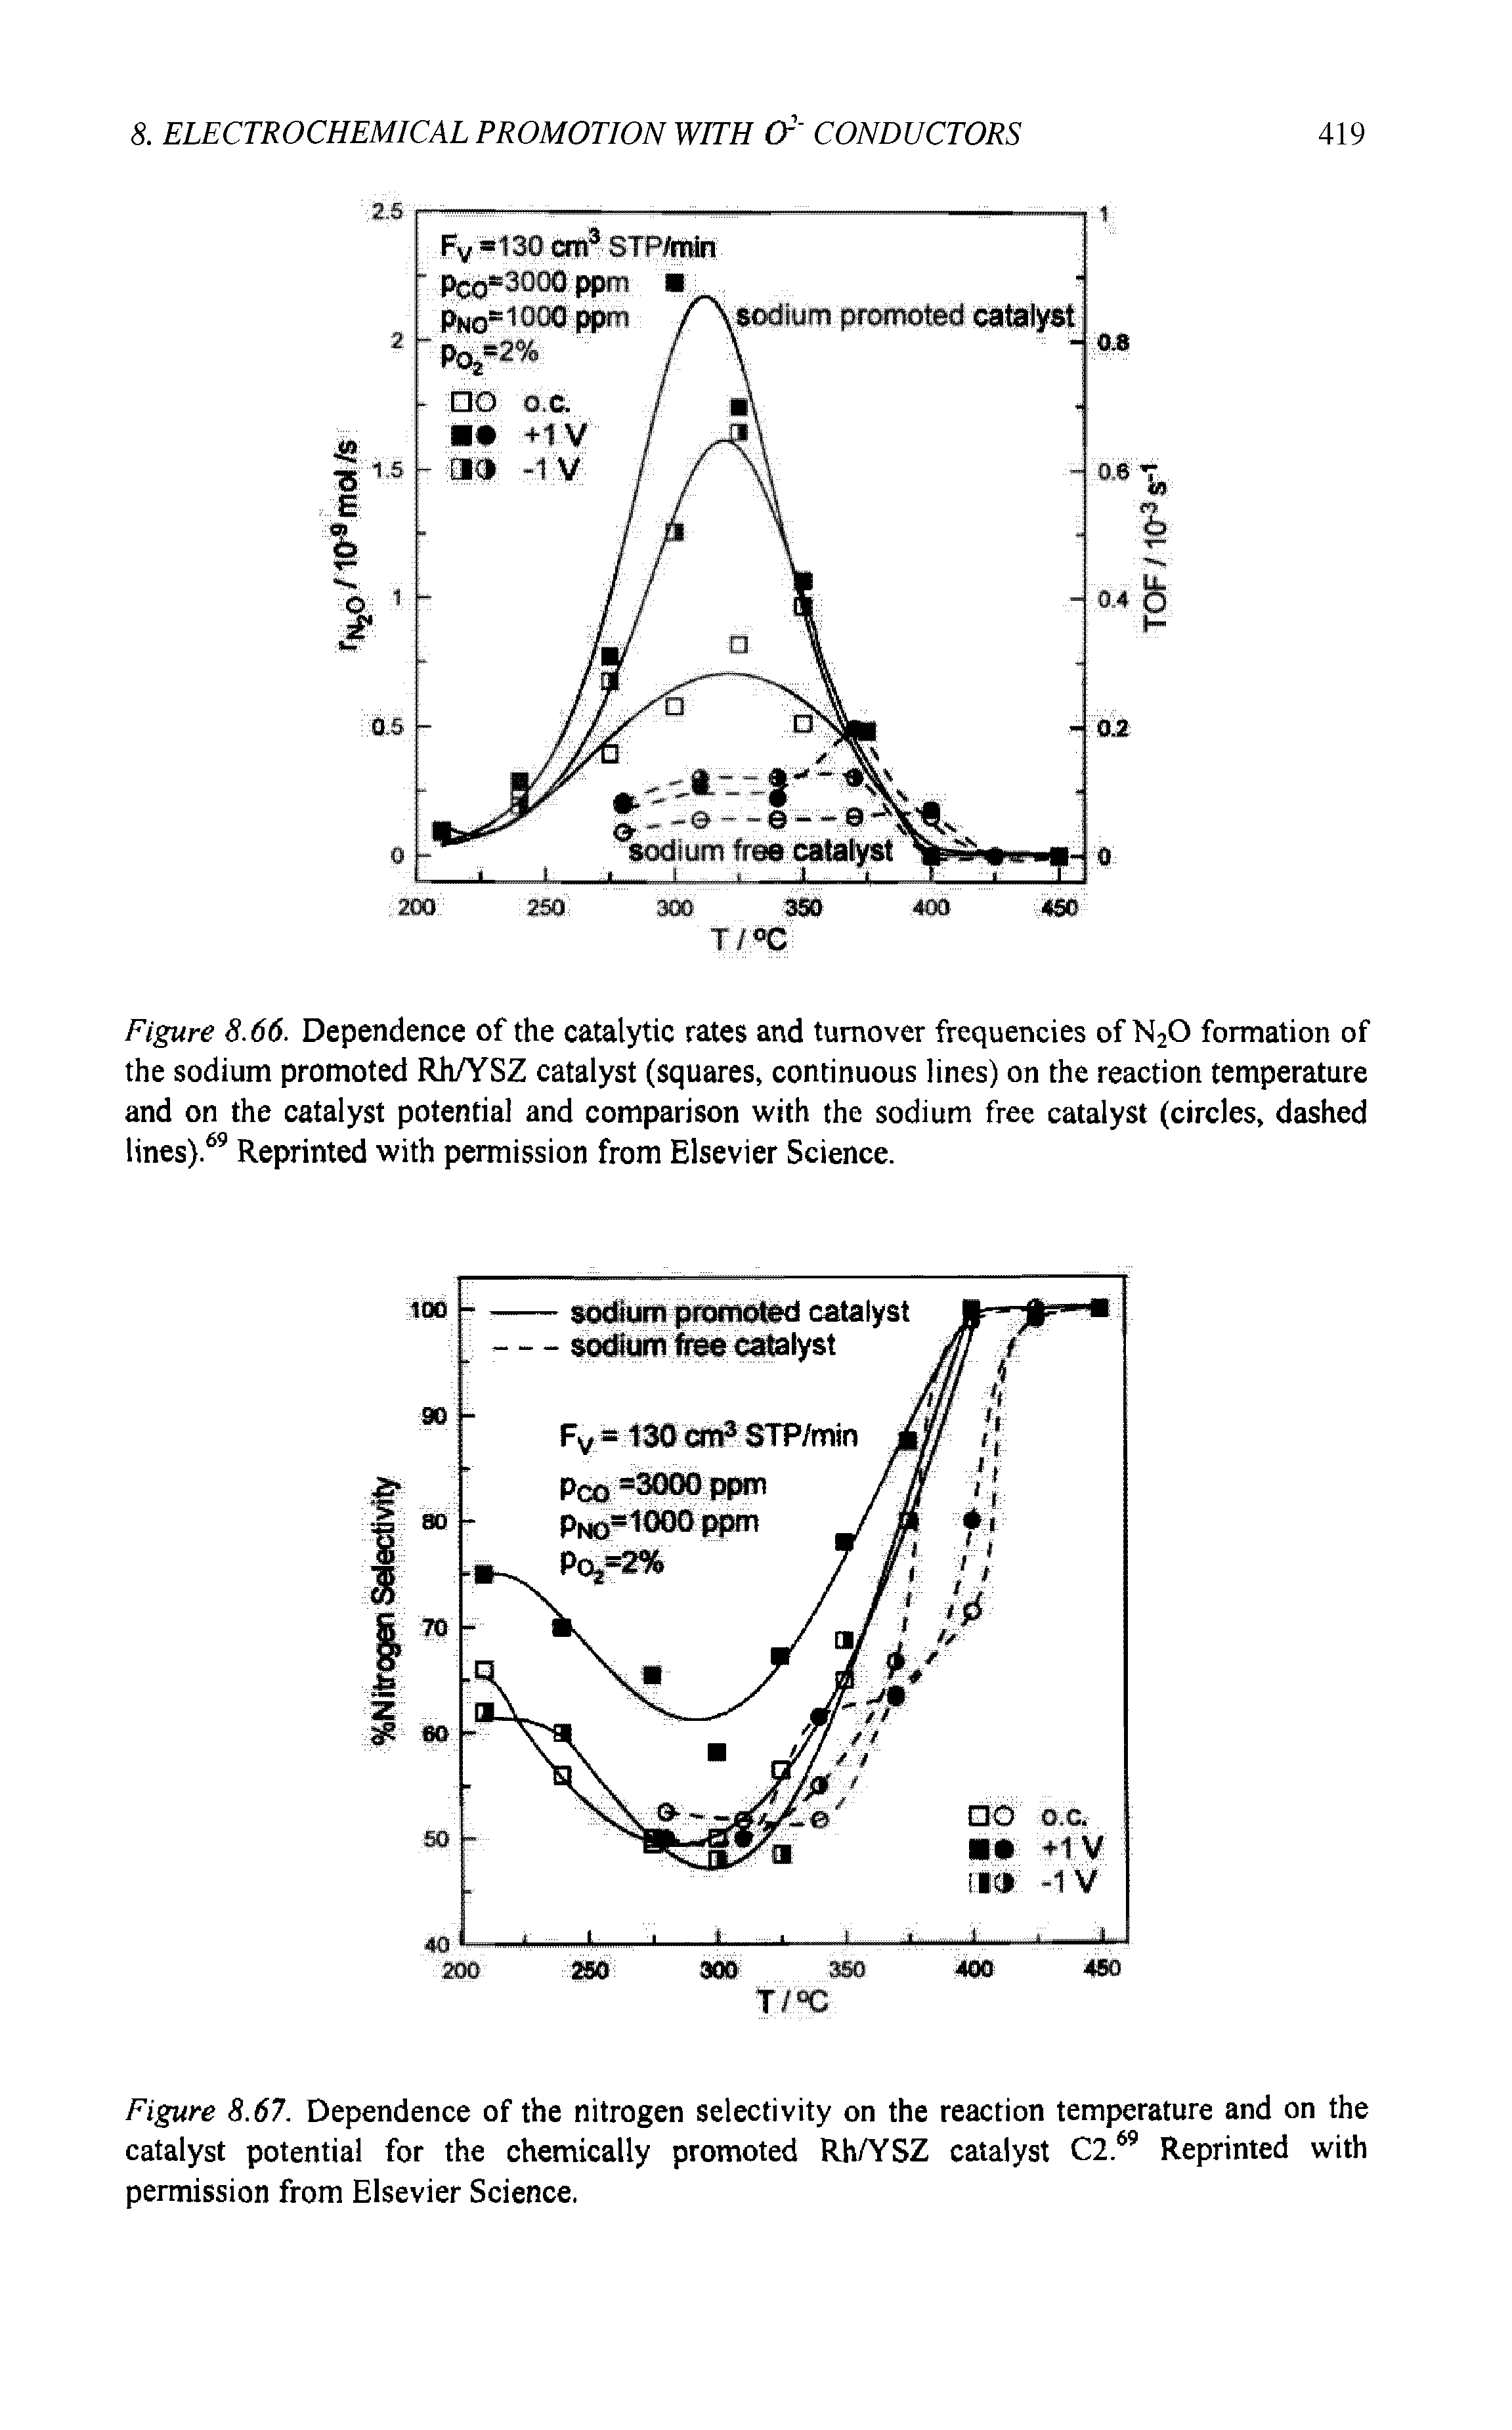 Figure 8.67. Dependence of the nitrogen selectivity on the reaction temperature and on the catalyst potential for the chemically promoted Rh/YSZ catalyst C2.69 Reprinted with permission from Elsevier Science.